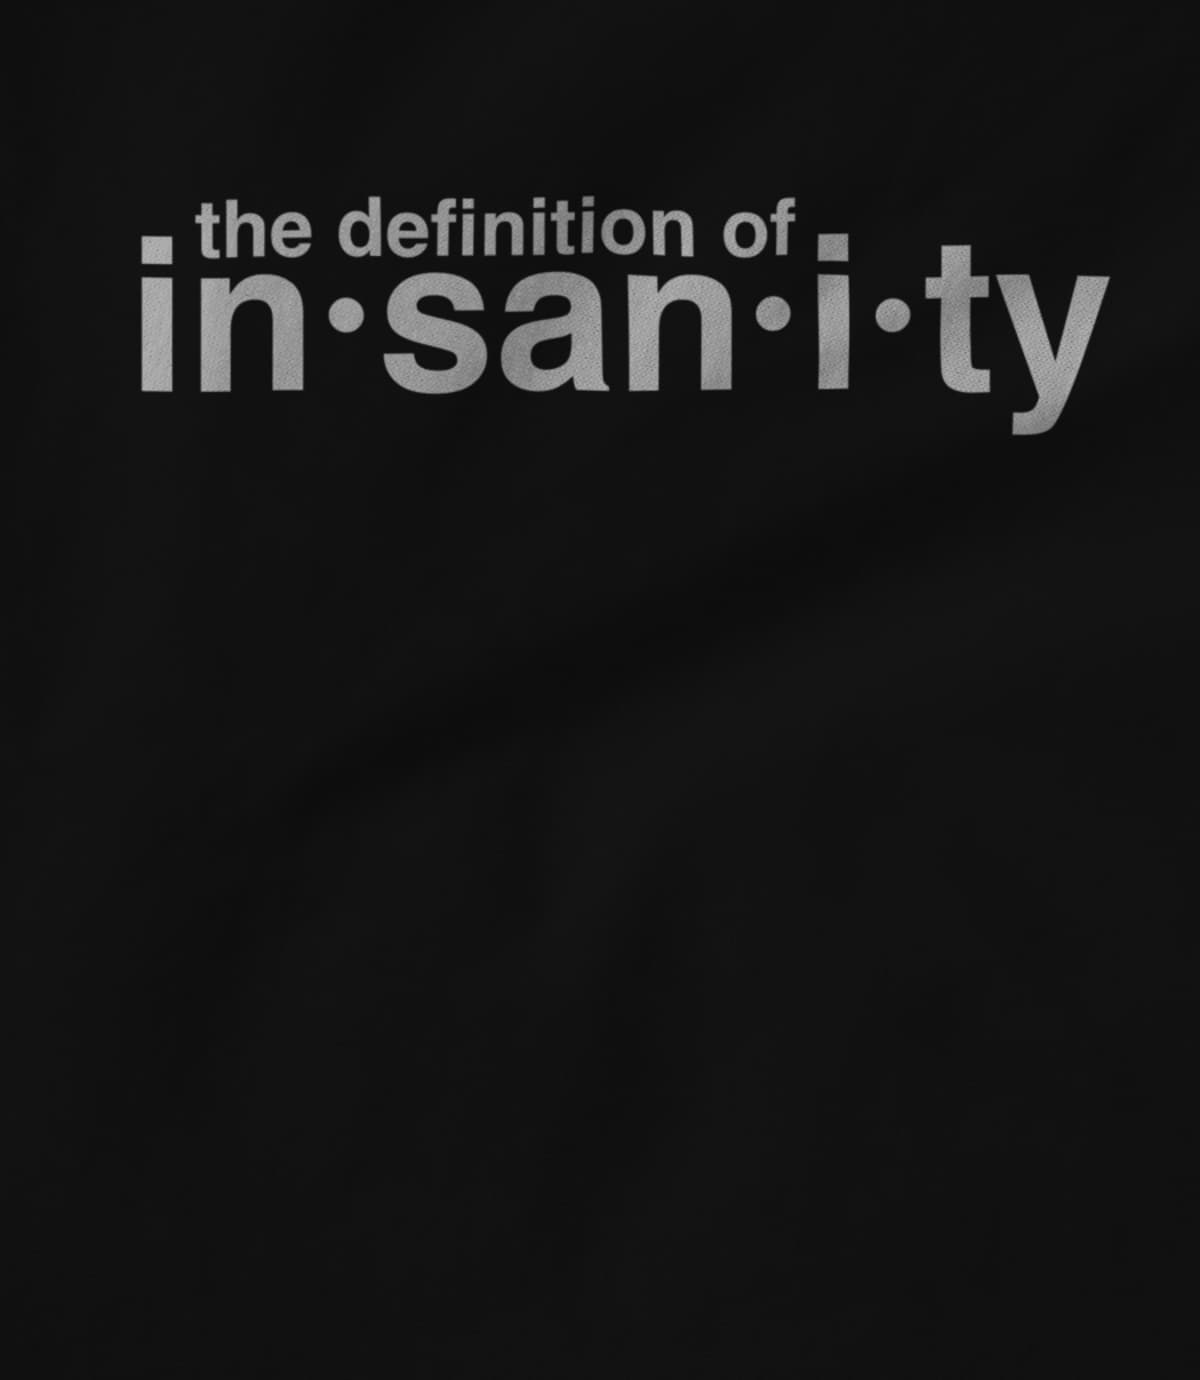 The Definition of Insanity